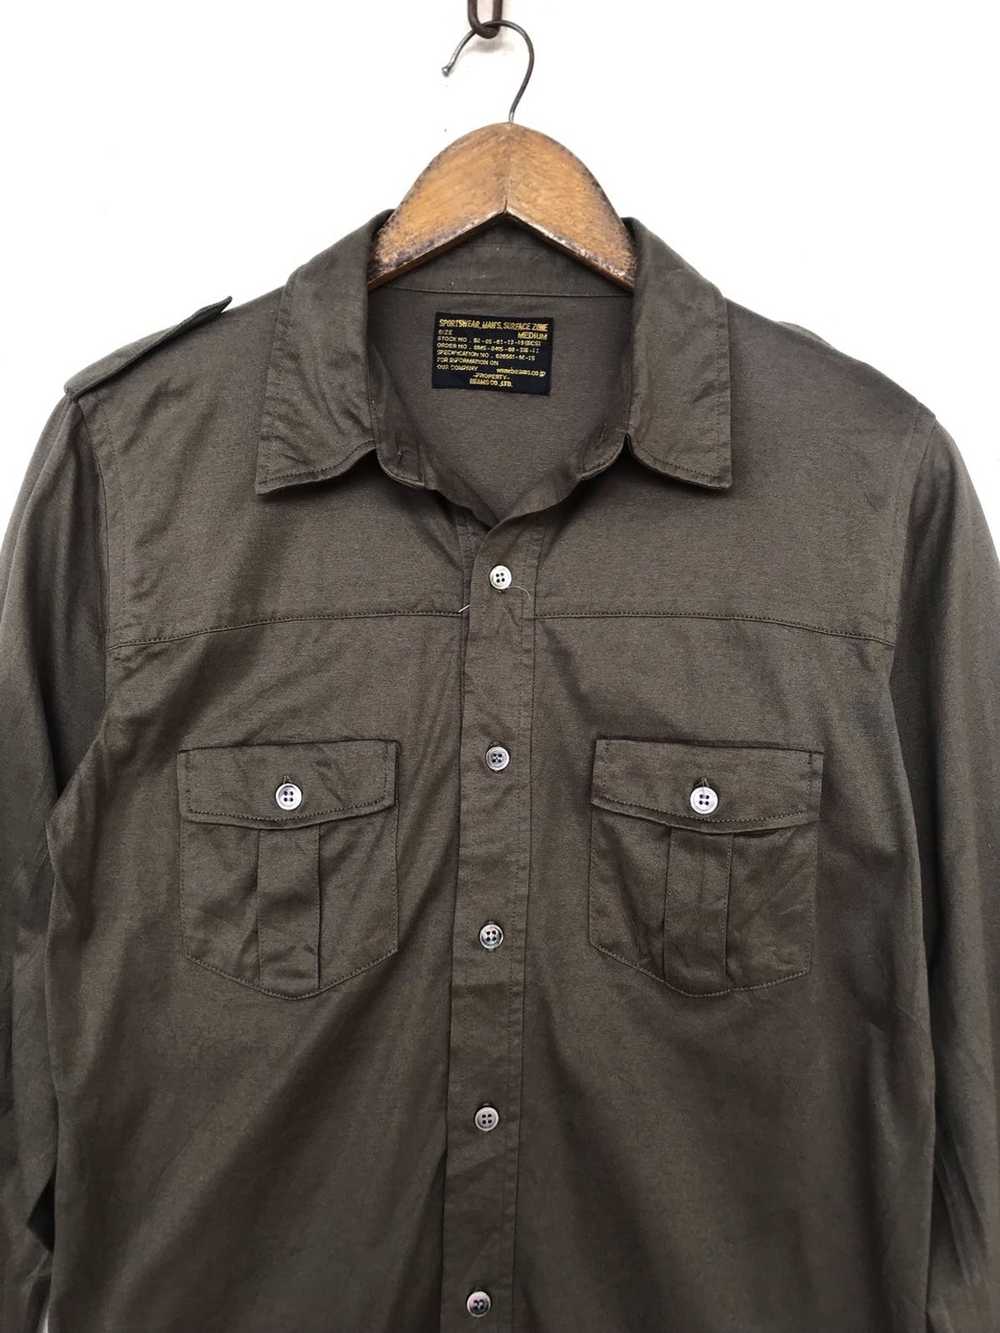 Beams Plus Button ups with Double Pockets shirt. - image 2